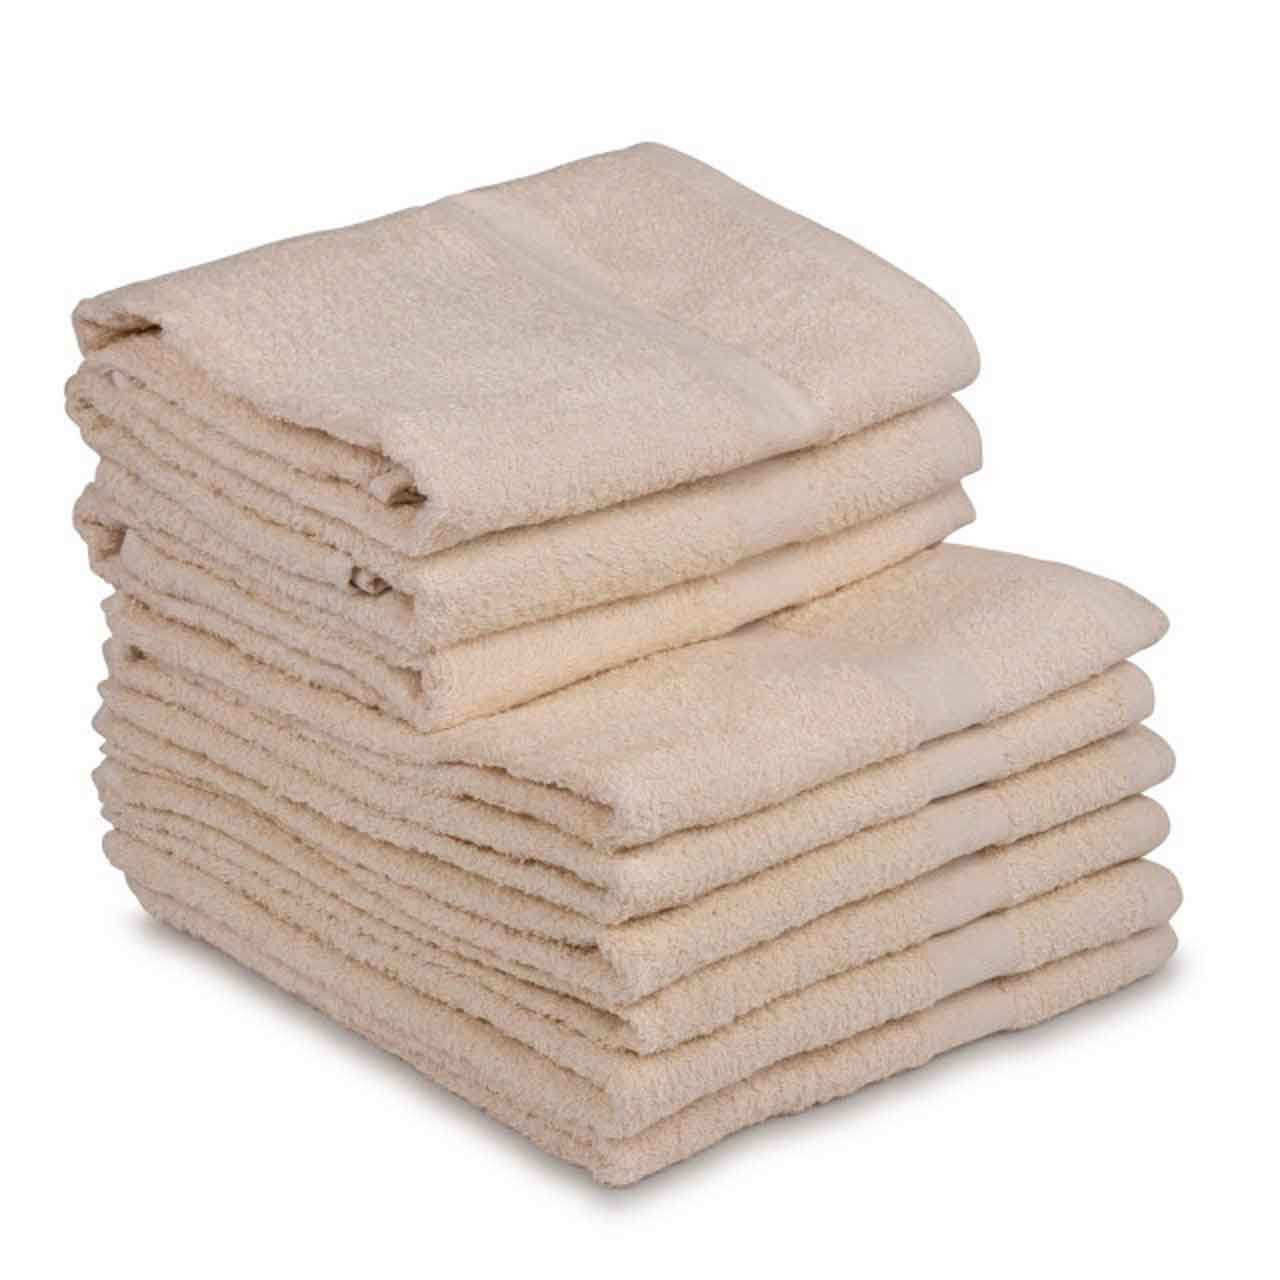 Are Coloured towels less absorbent?